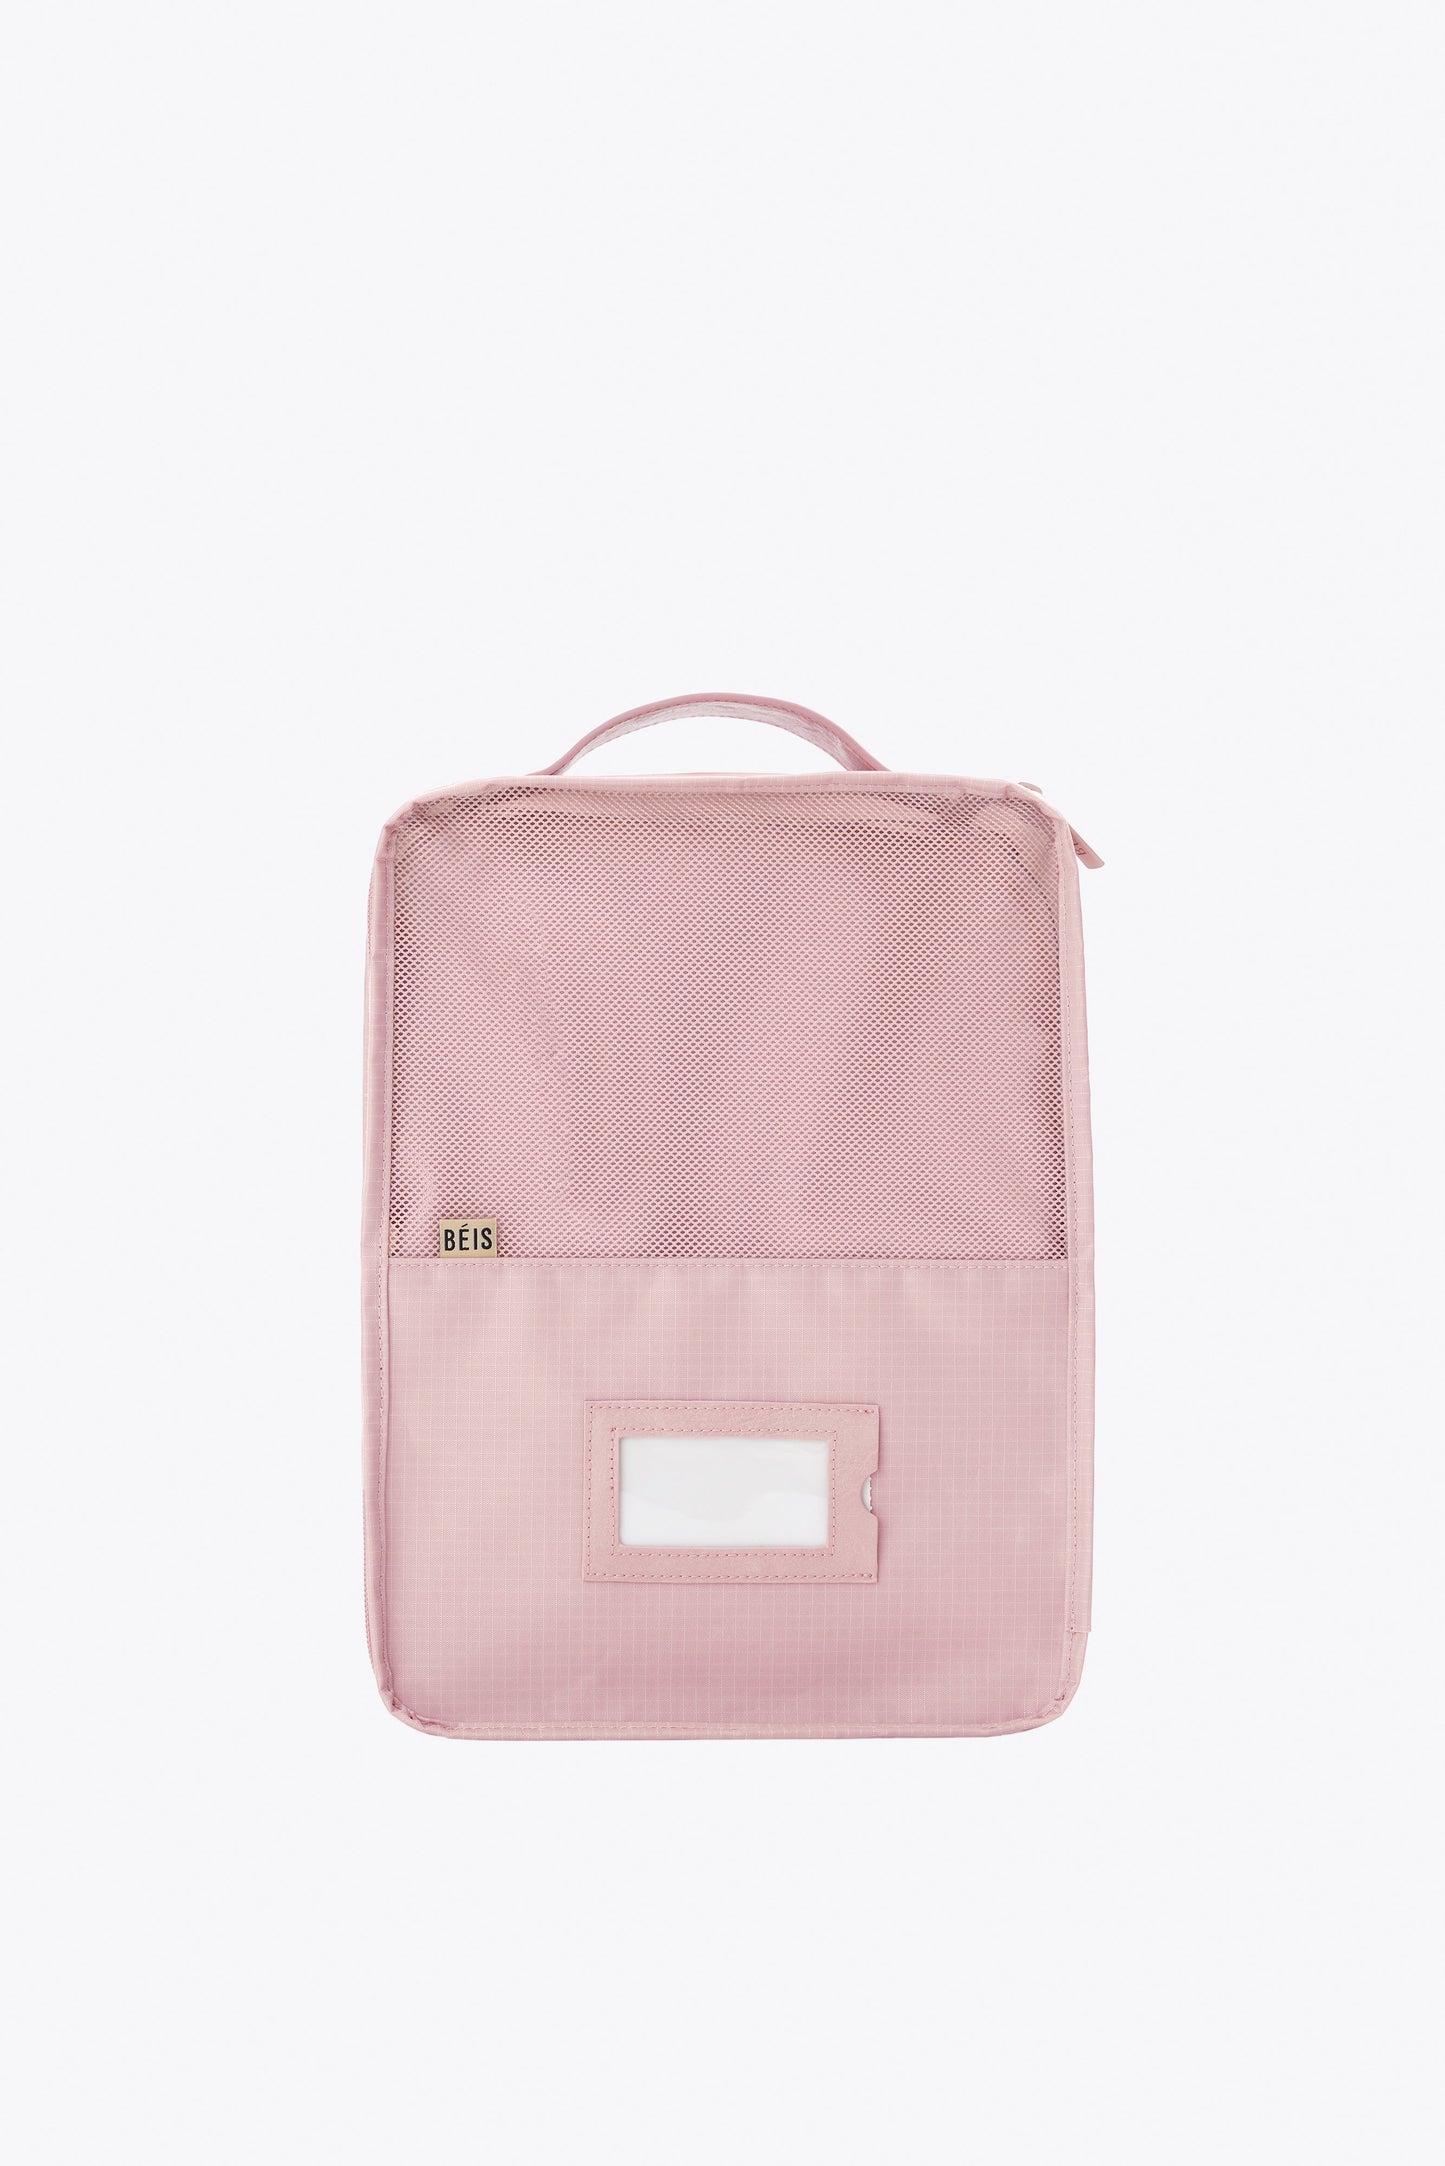 The Packing Cubes in Atlas Pink